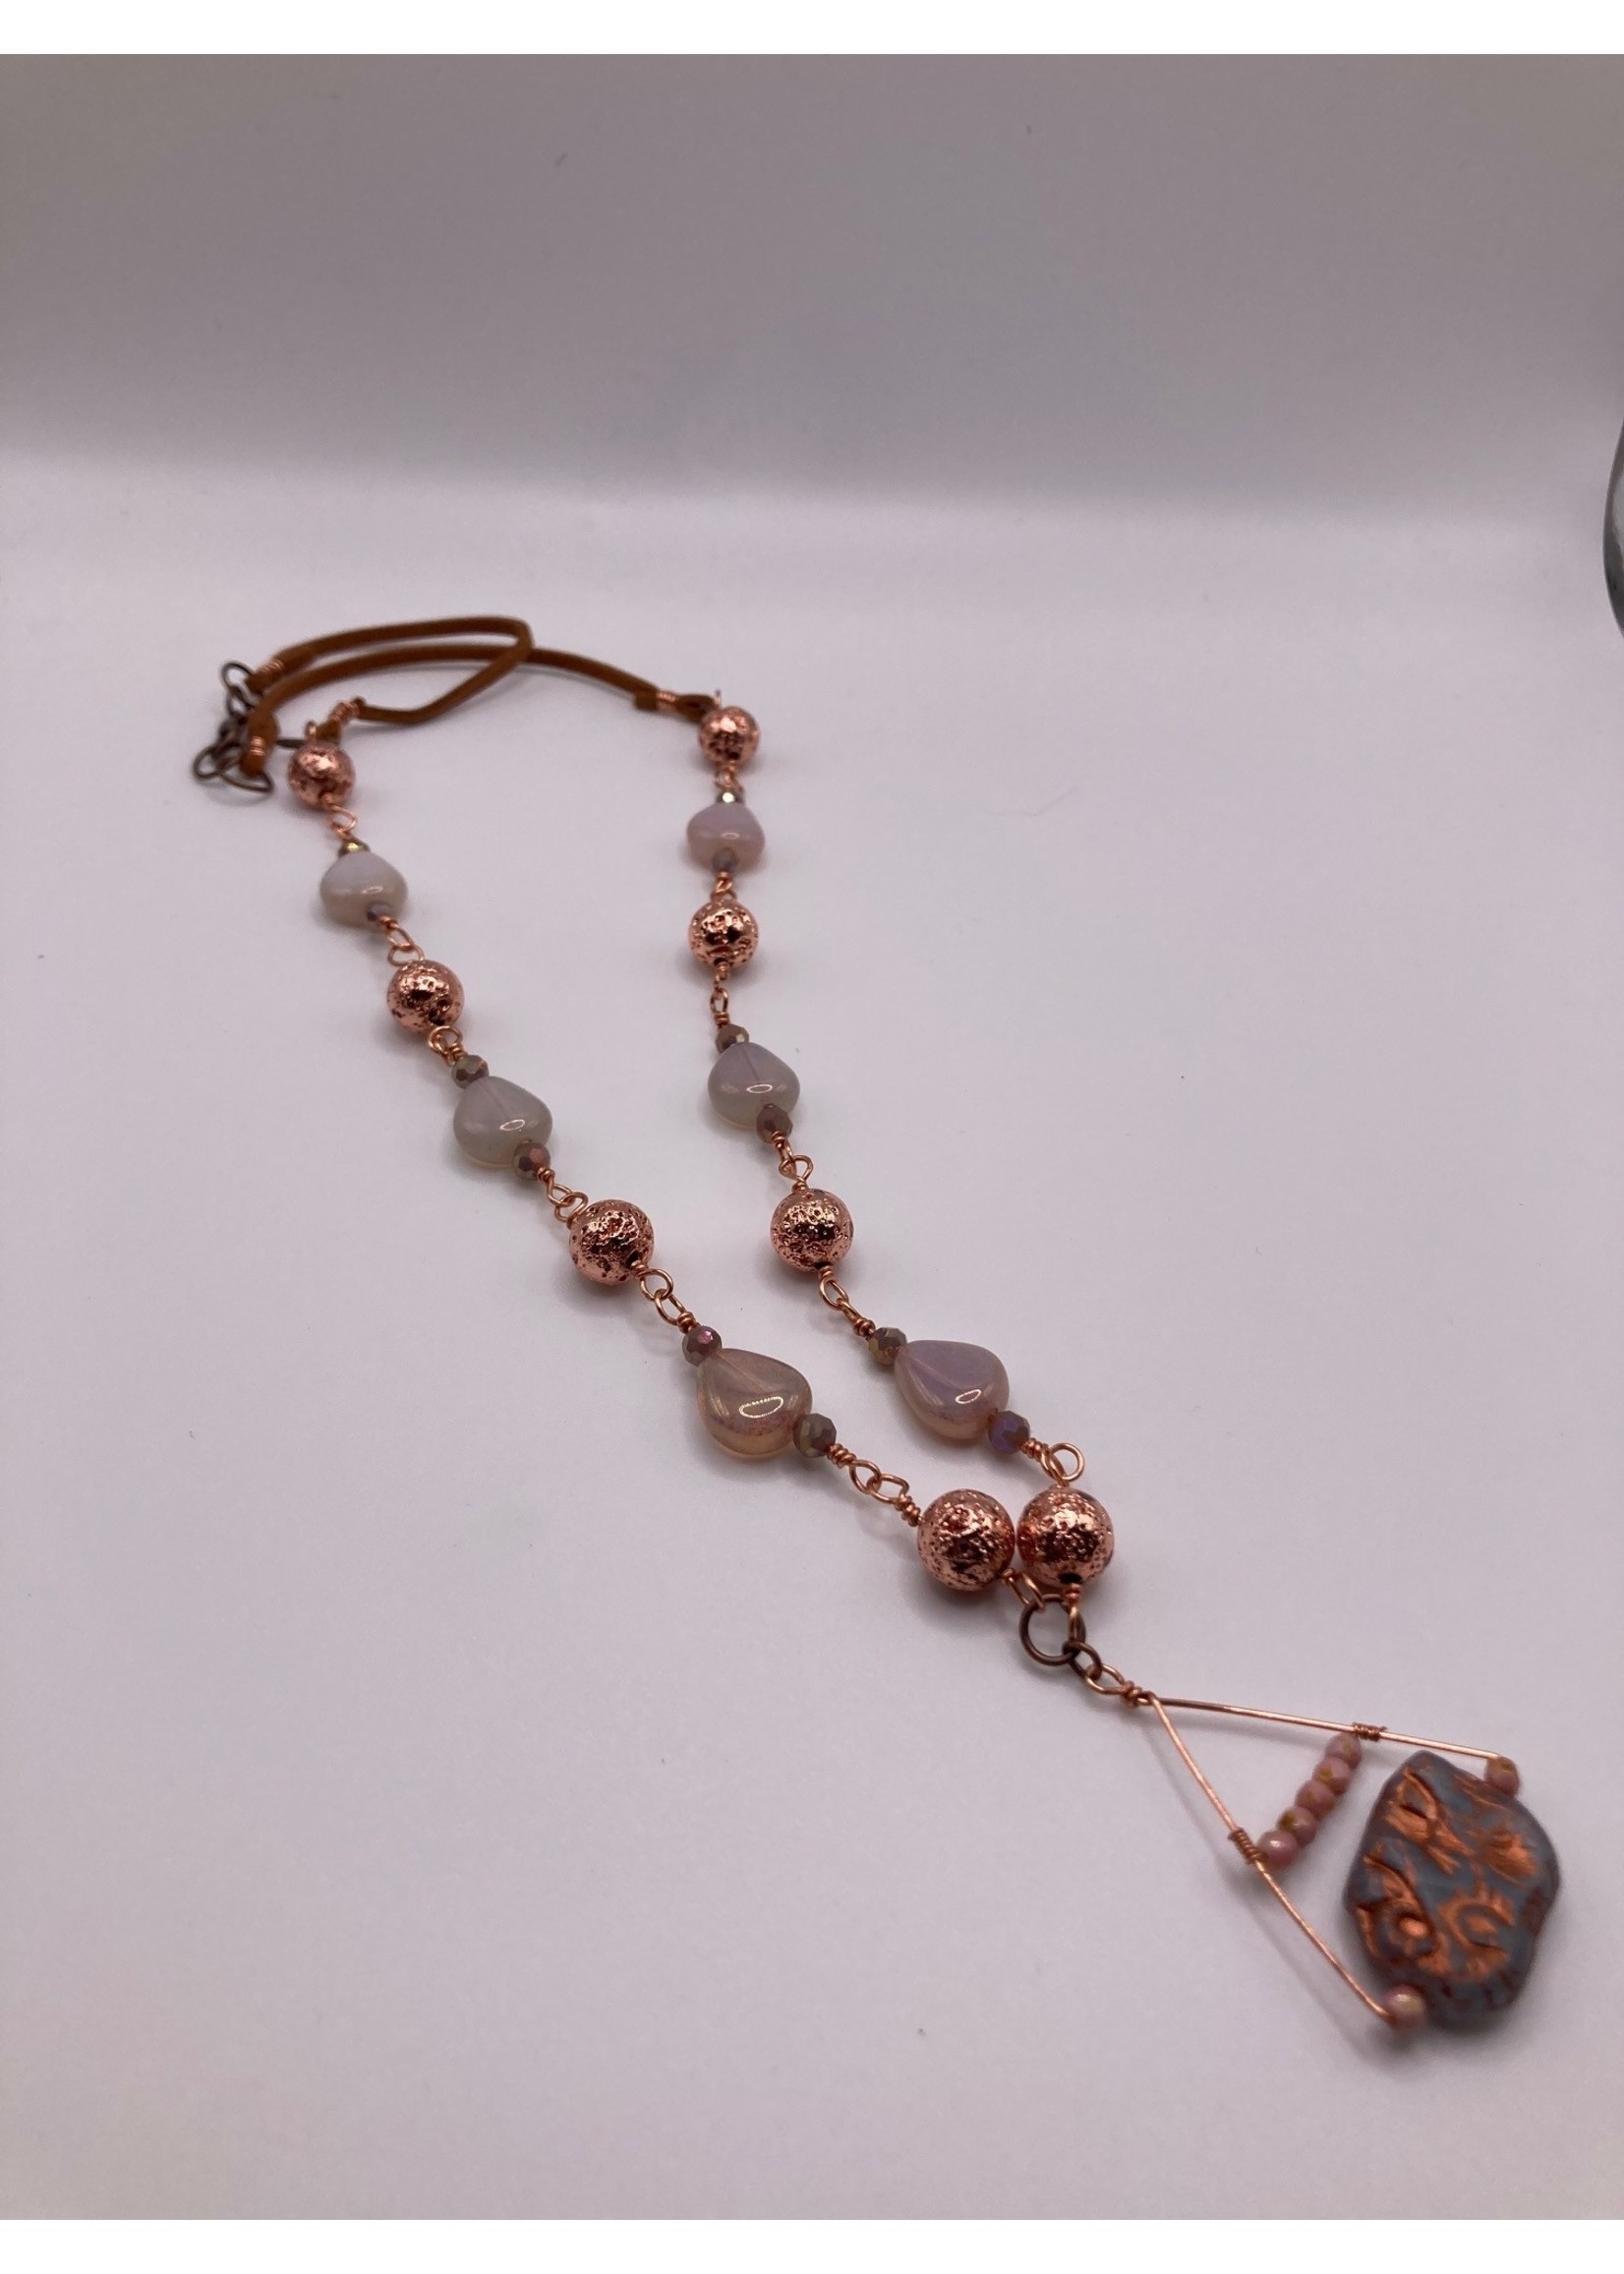 Our Twisted Dahlia Opalite Triangle Beads and Copper Covered Lava Beads with Czech Glass Elephant Necklace